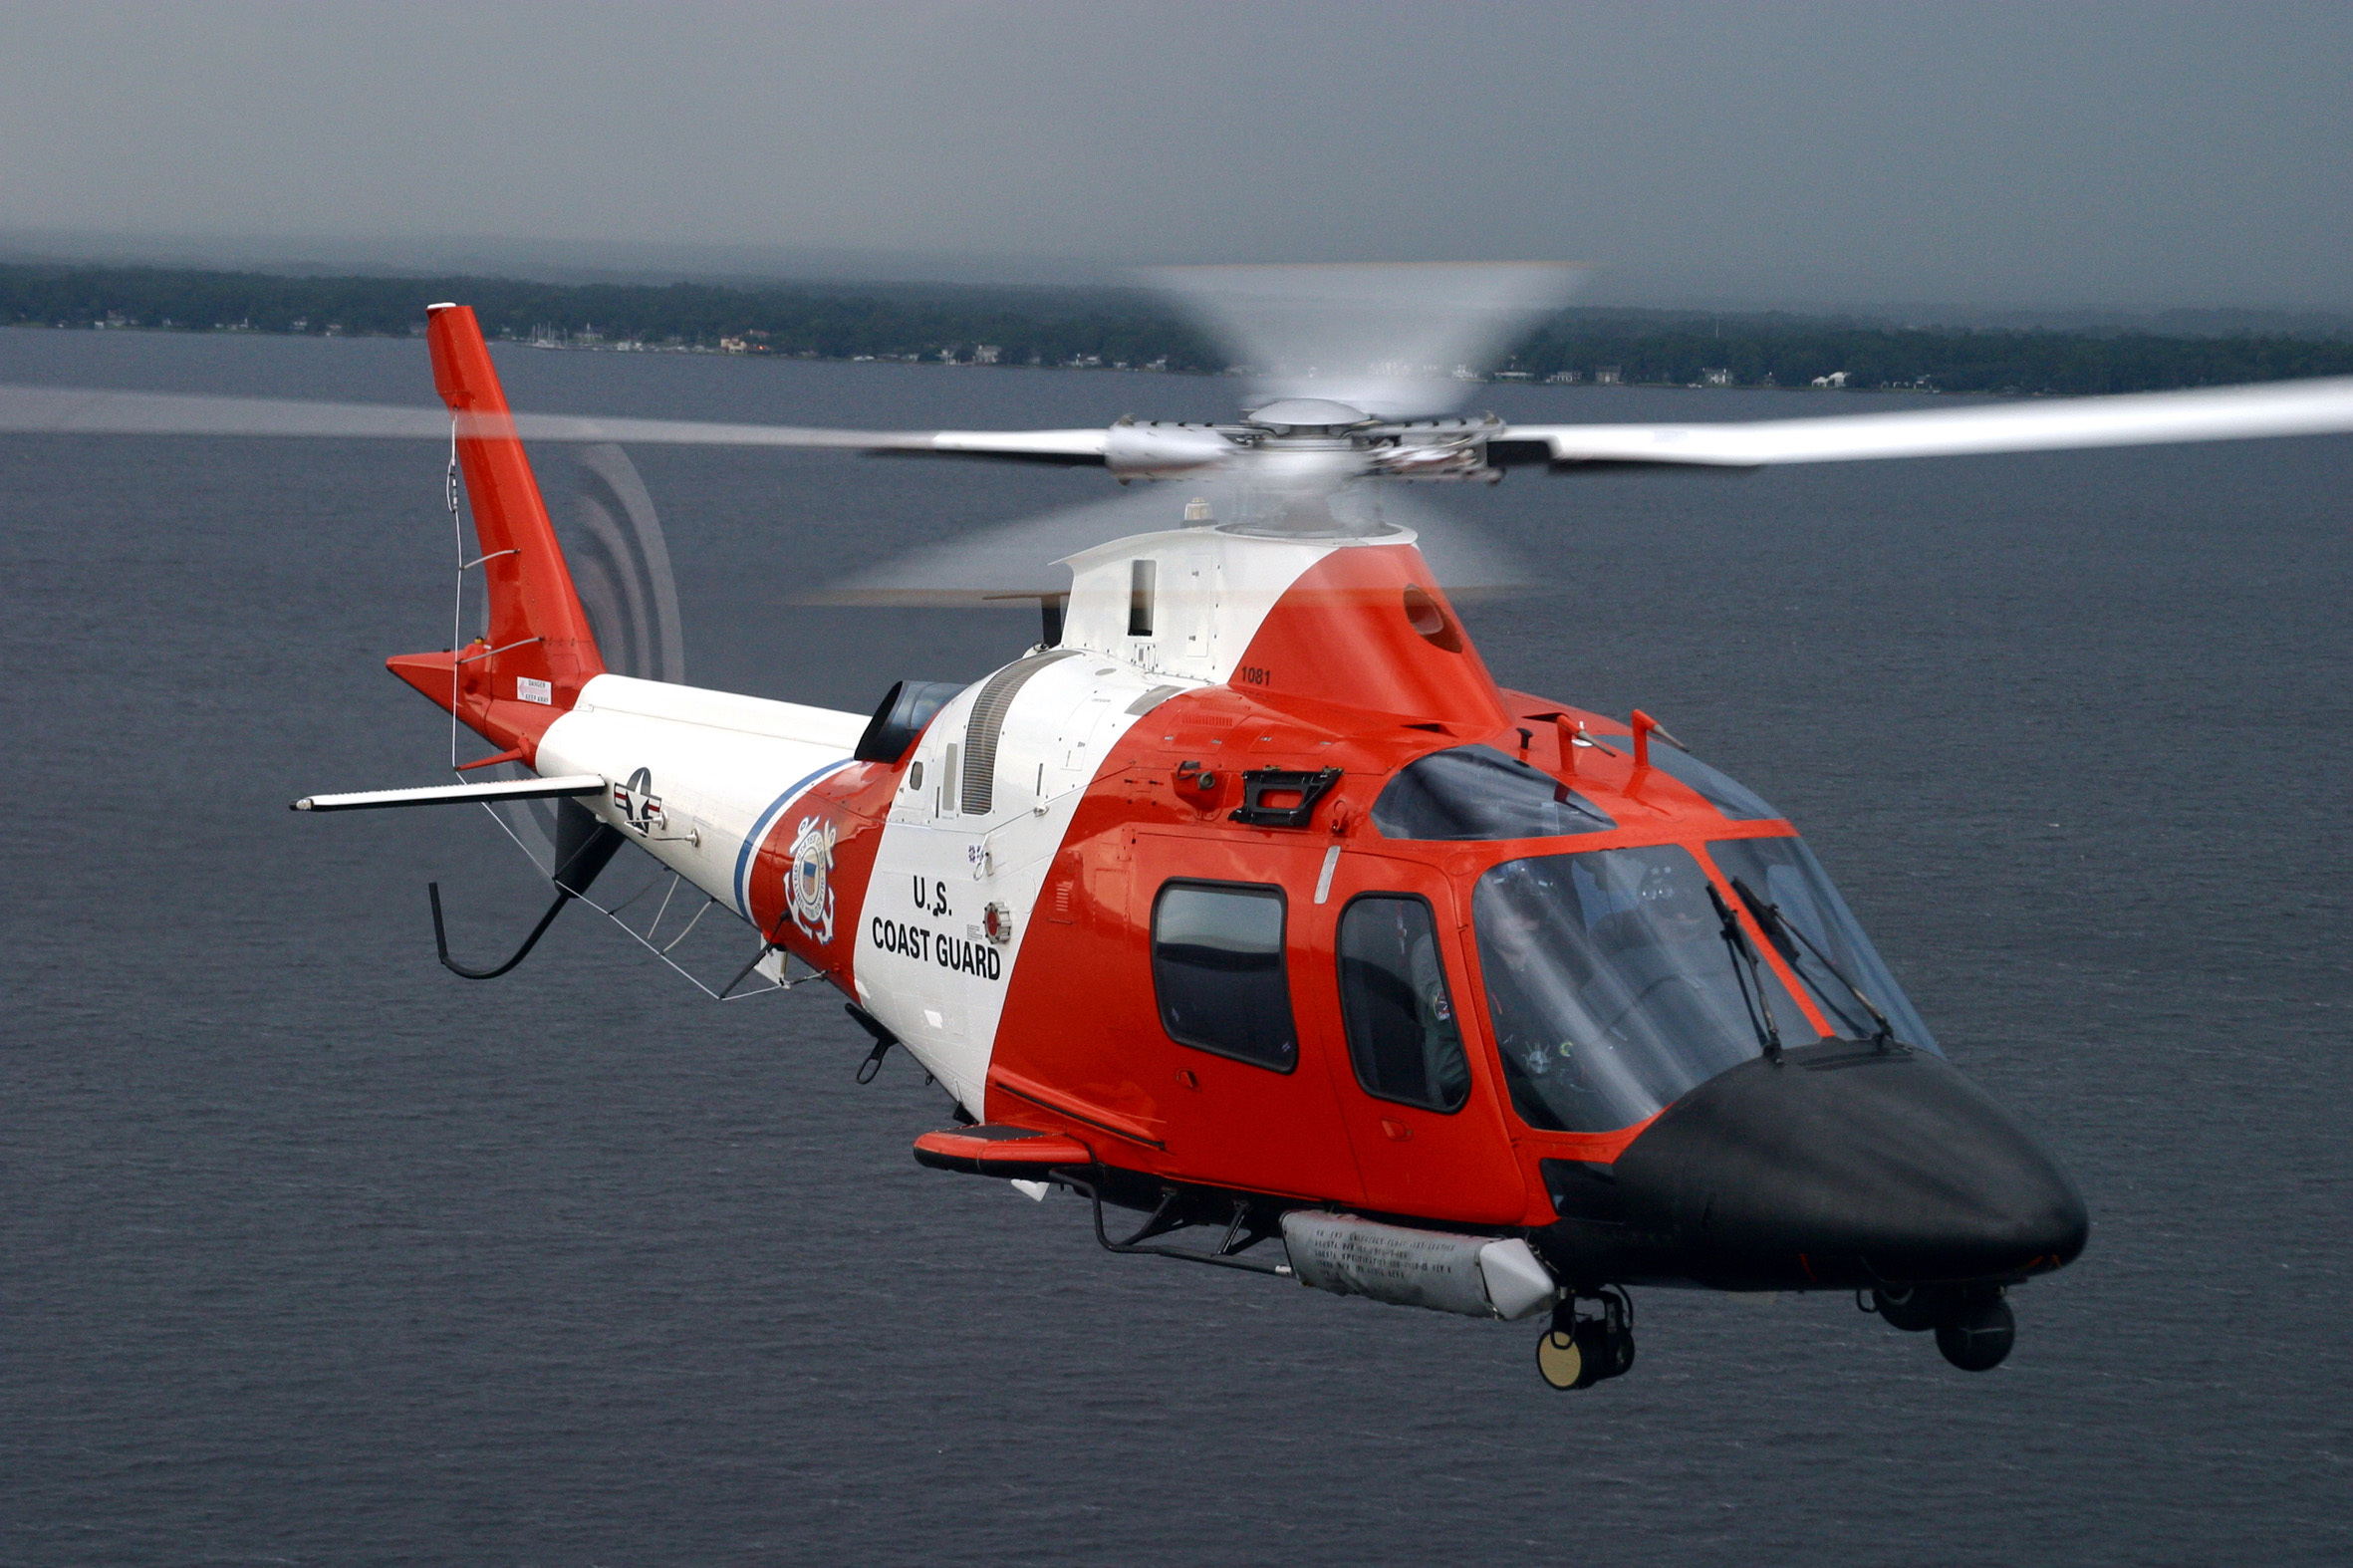 helicopters_coast_guard_us_helicopter_desktop_2362x1574_wallpaper-214585.jpg